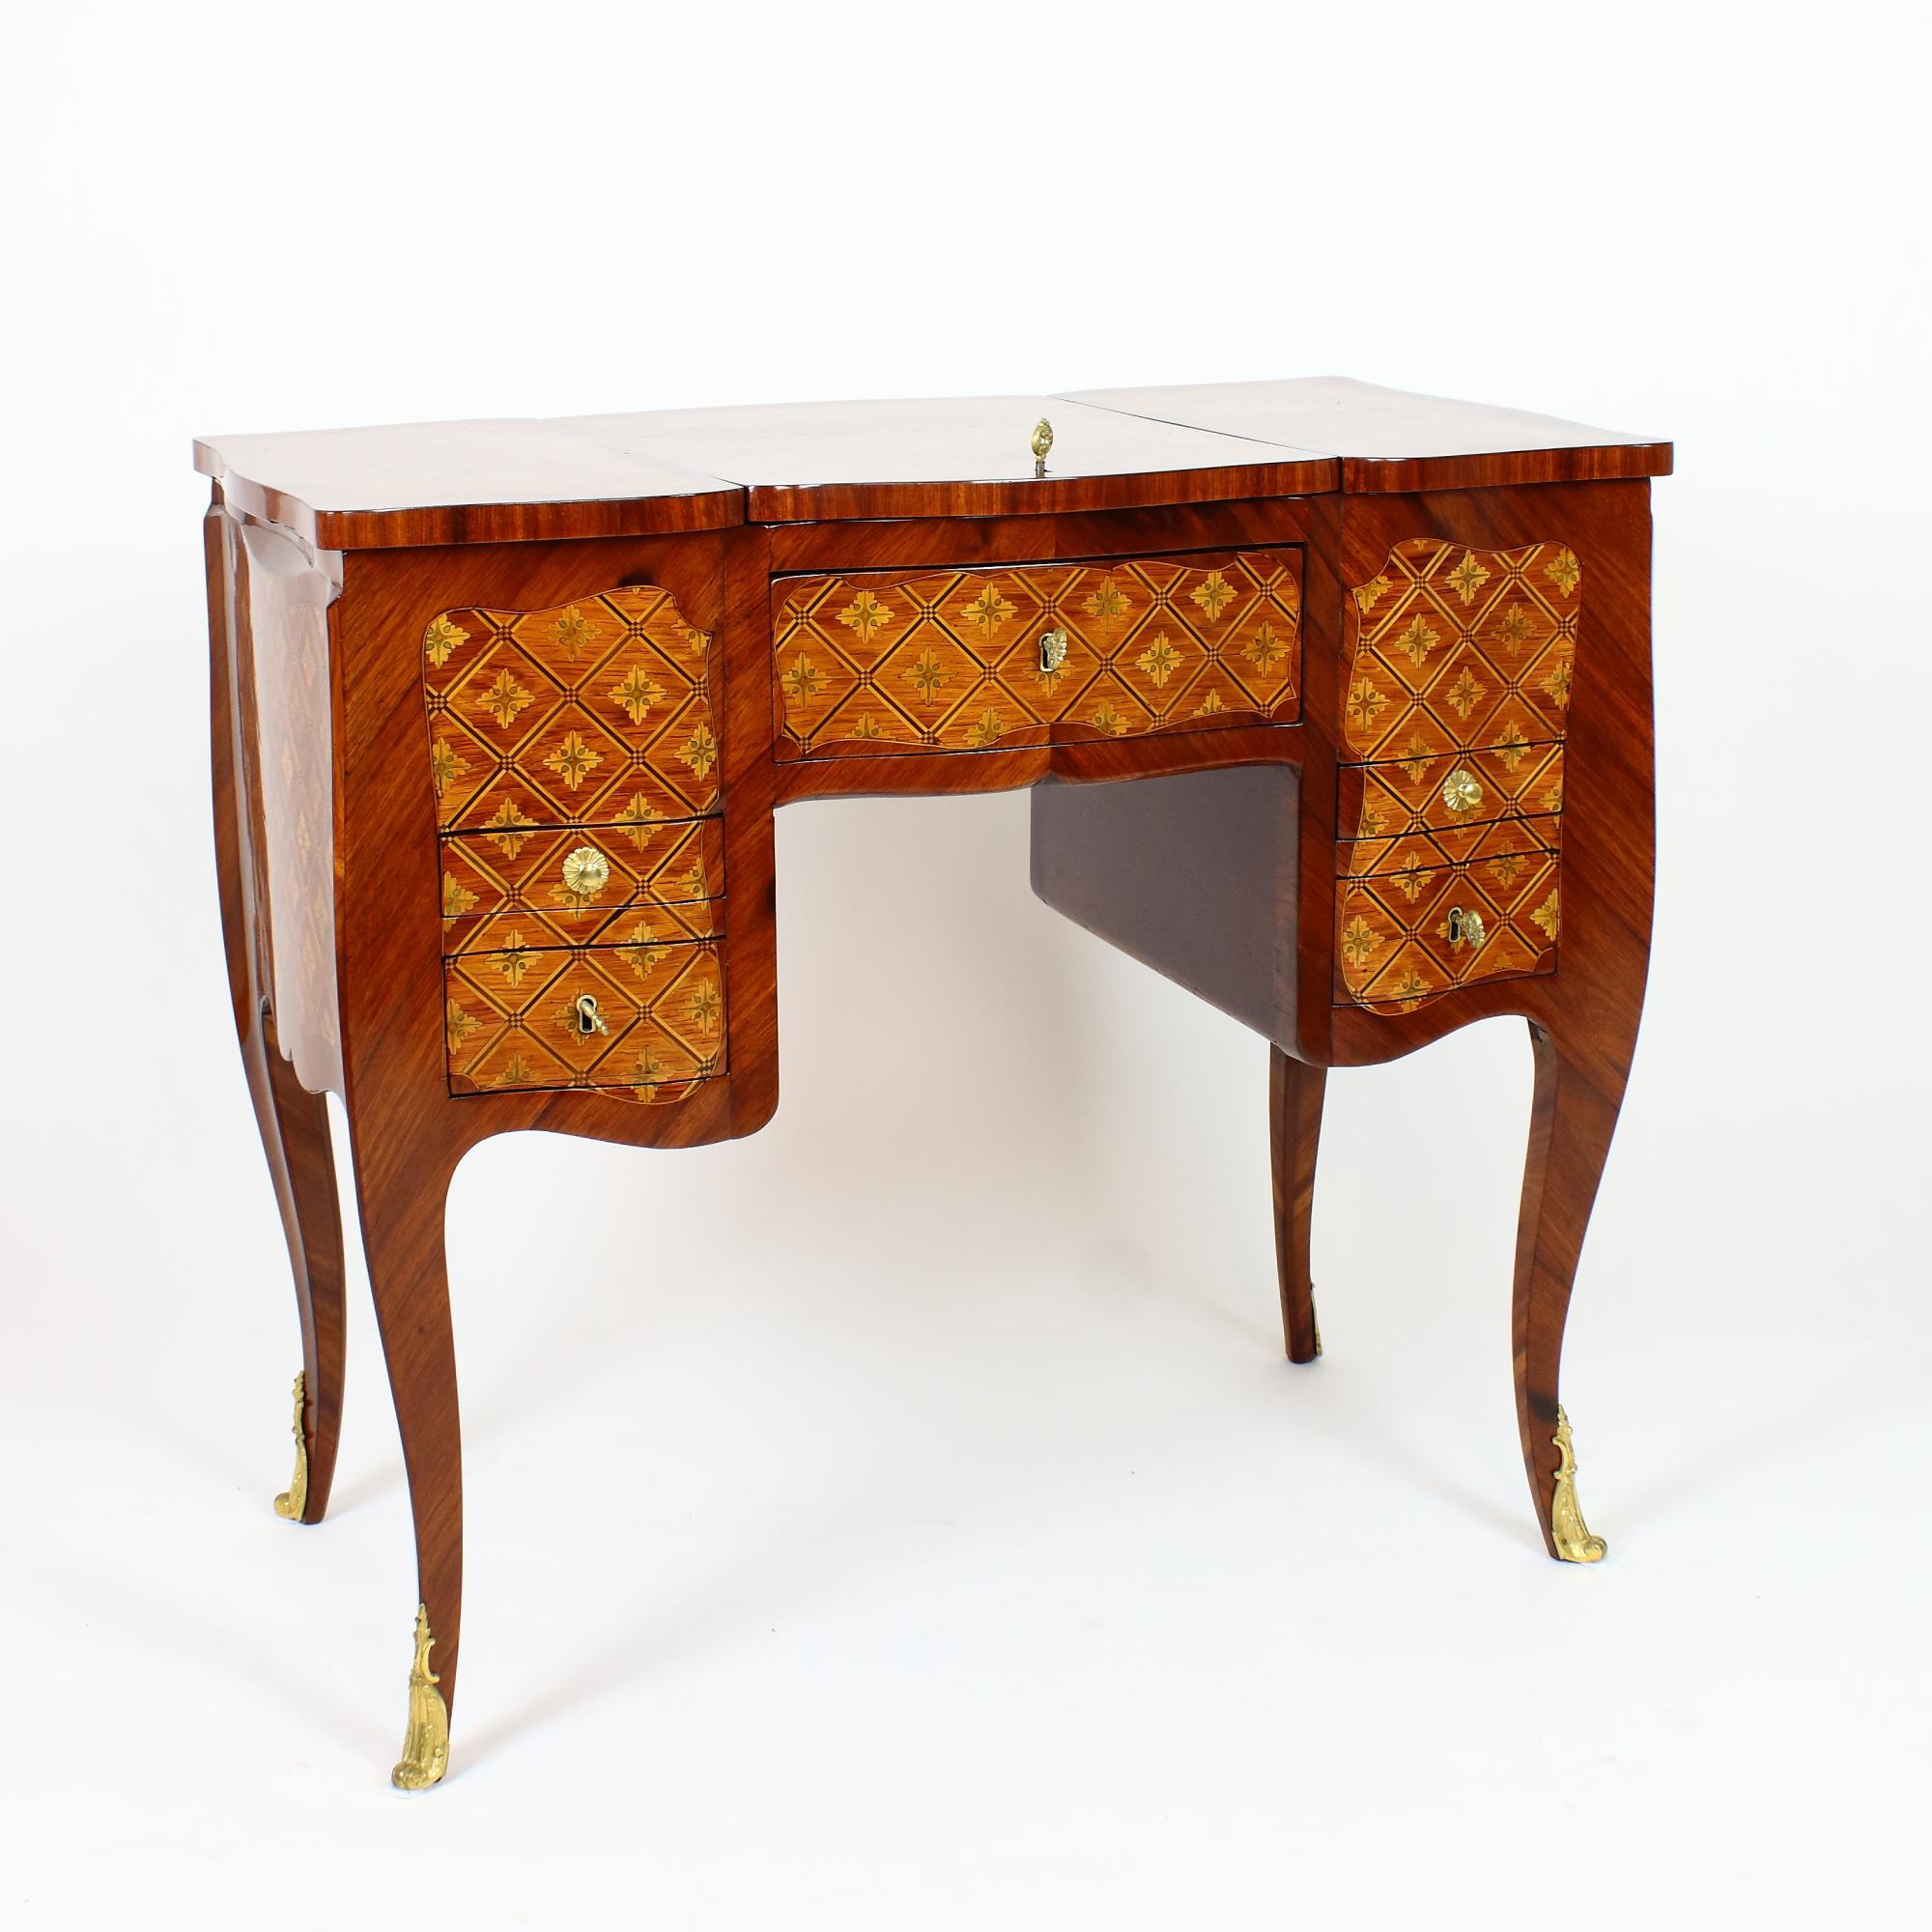 Excellent French Louis XV Marquetry Dressing Table, so-called 